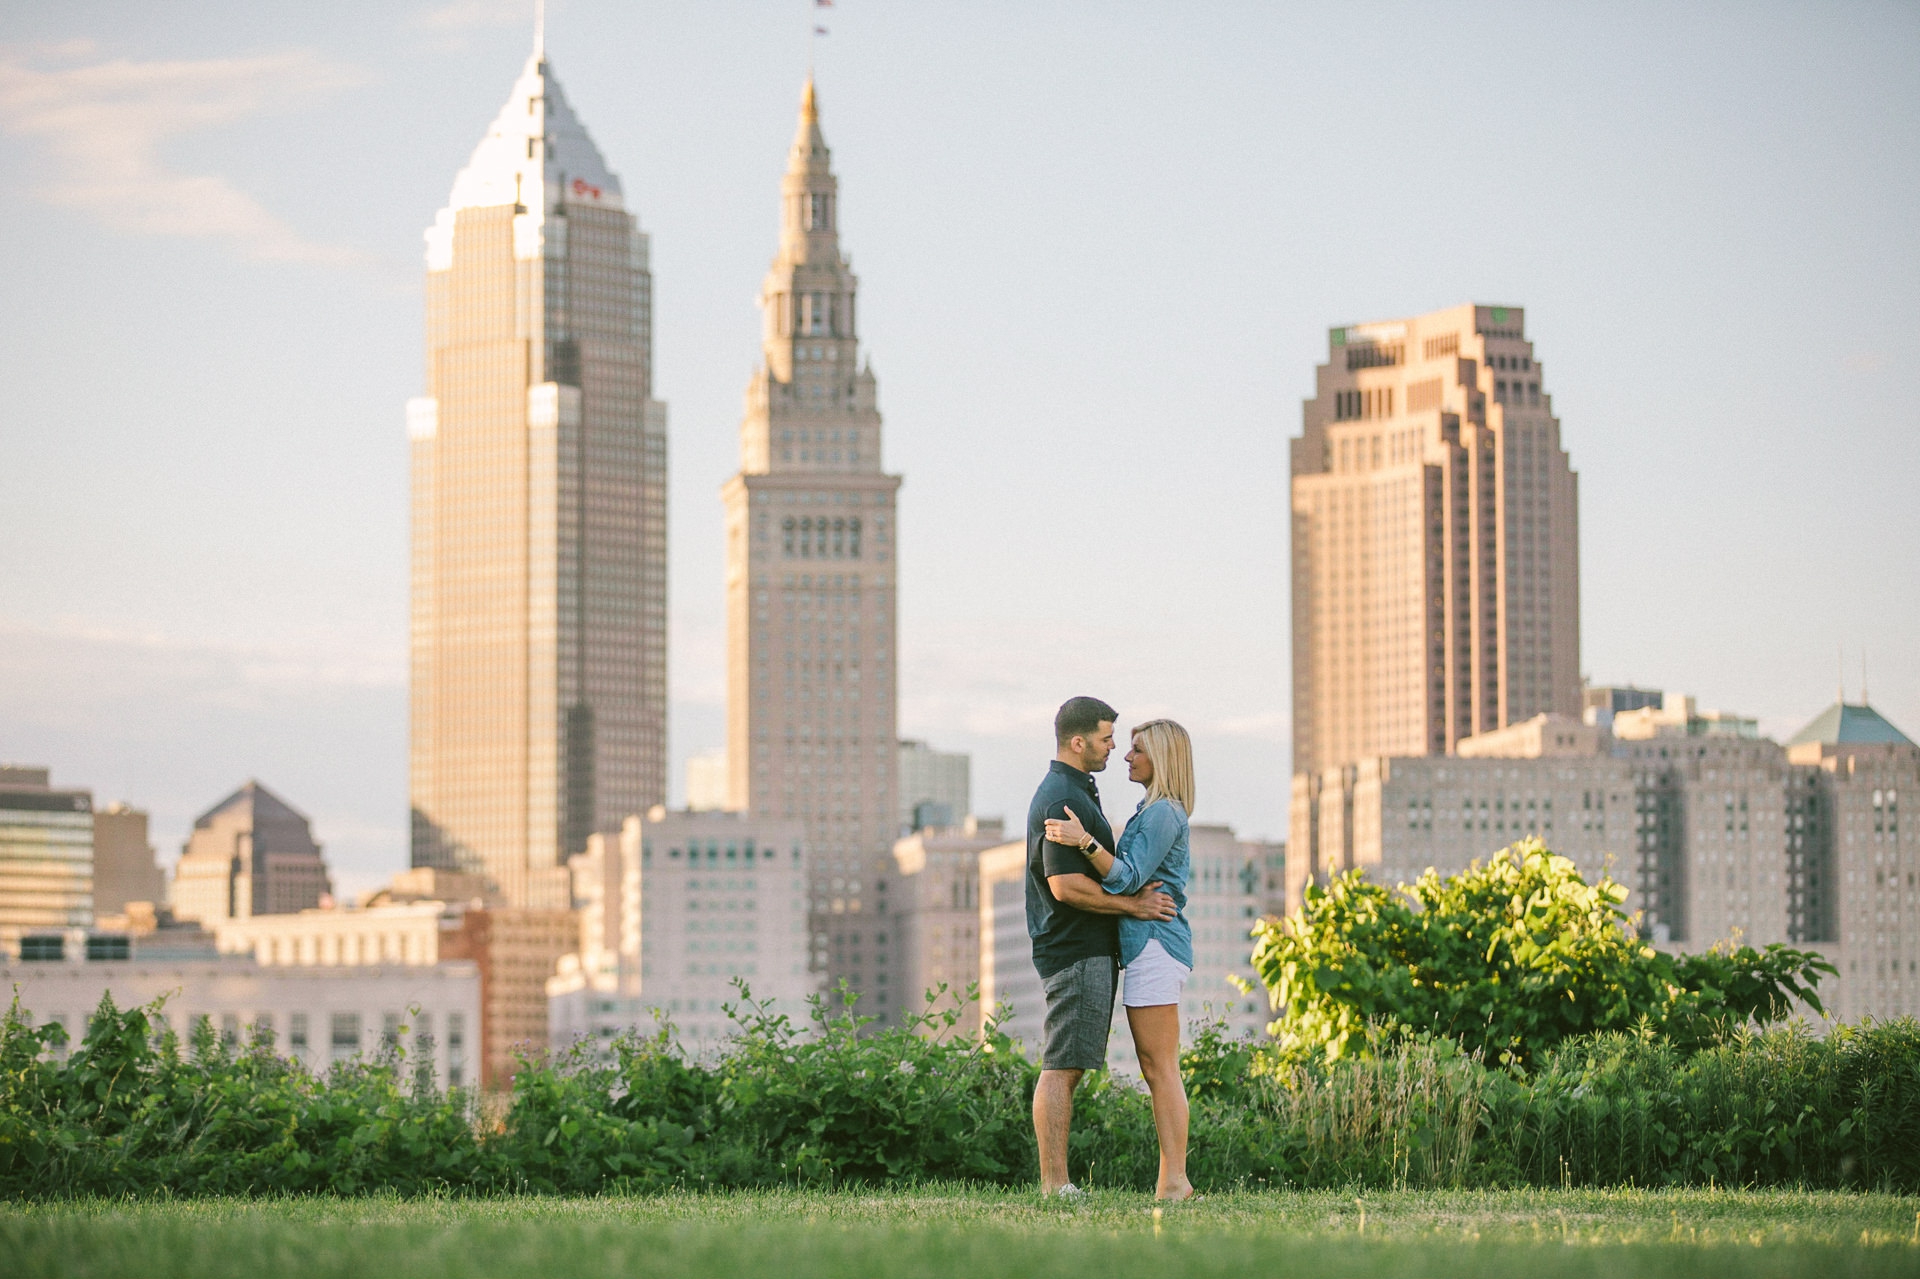 Sara Shookman Angelo DiFranco Engagement photos in cleveland by too much awesomeness photography 19.jpg